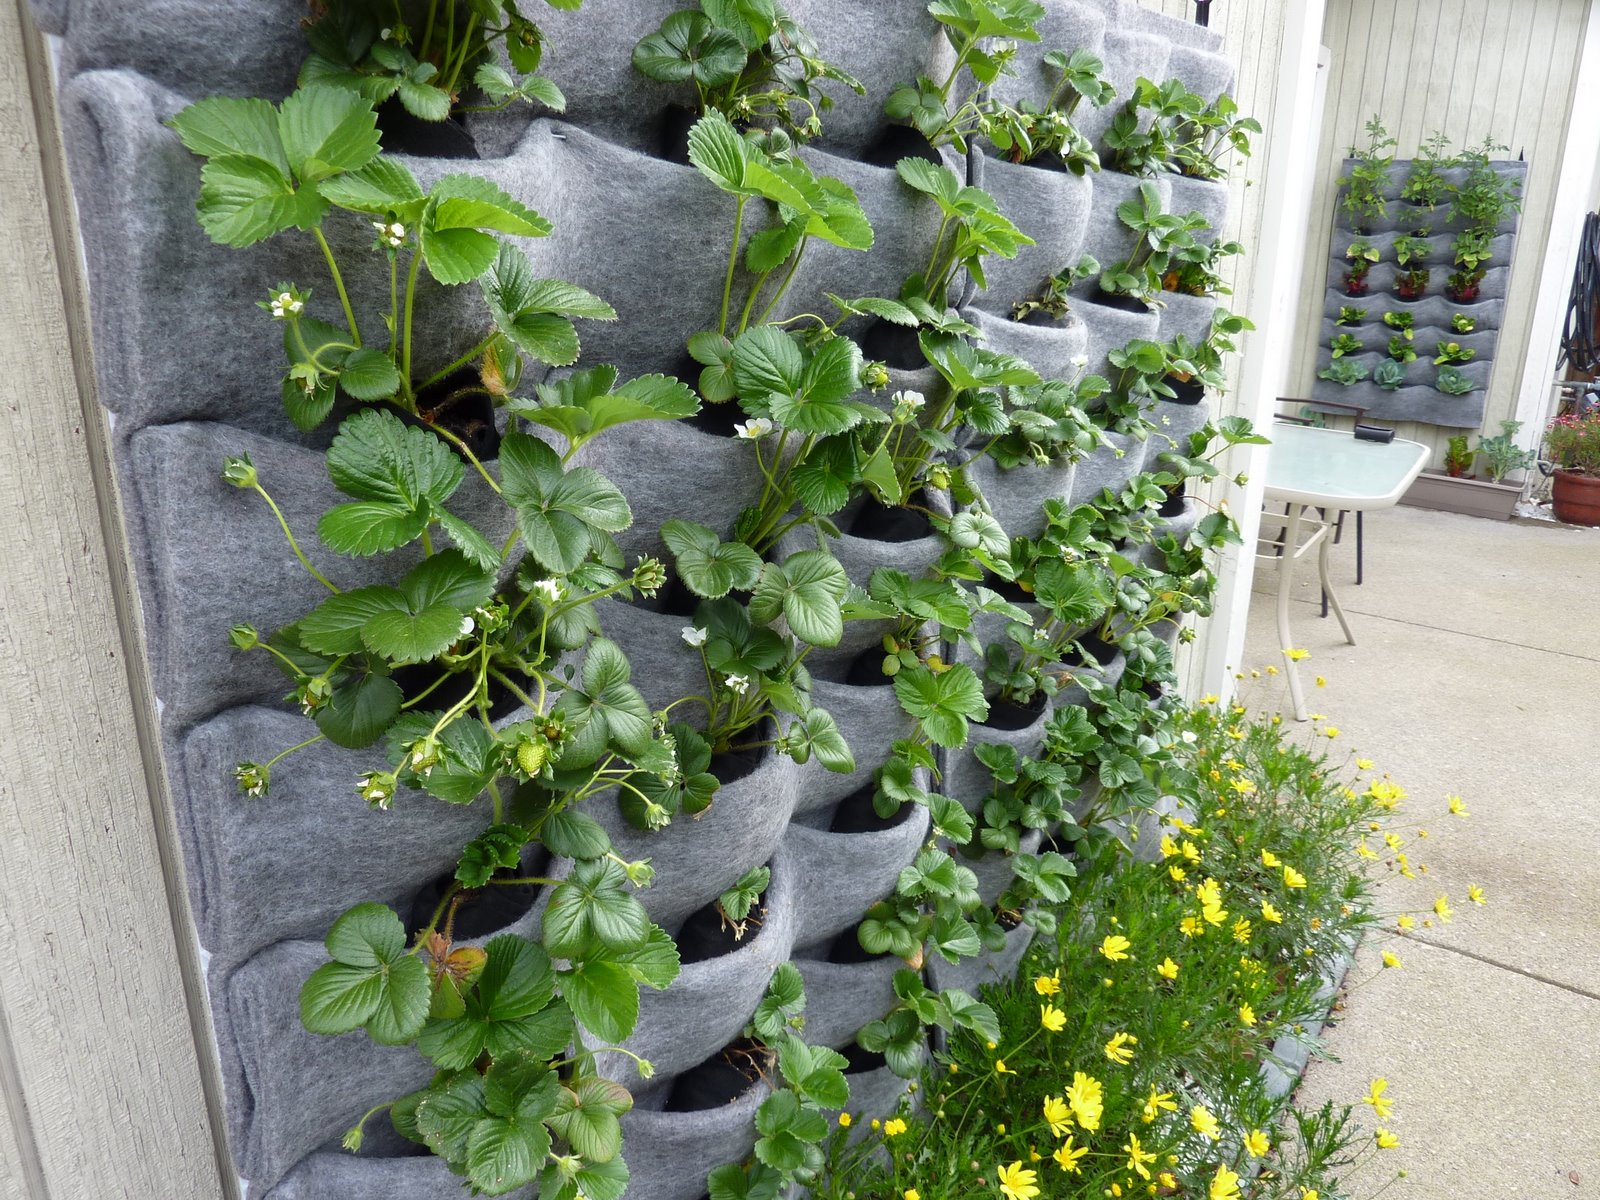 Plants On Walls vertical garden systems: Harvest Walls Growing In